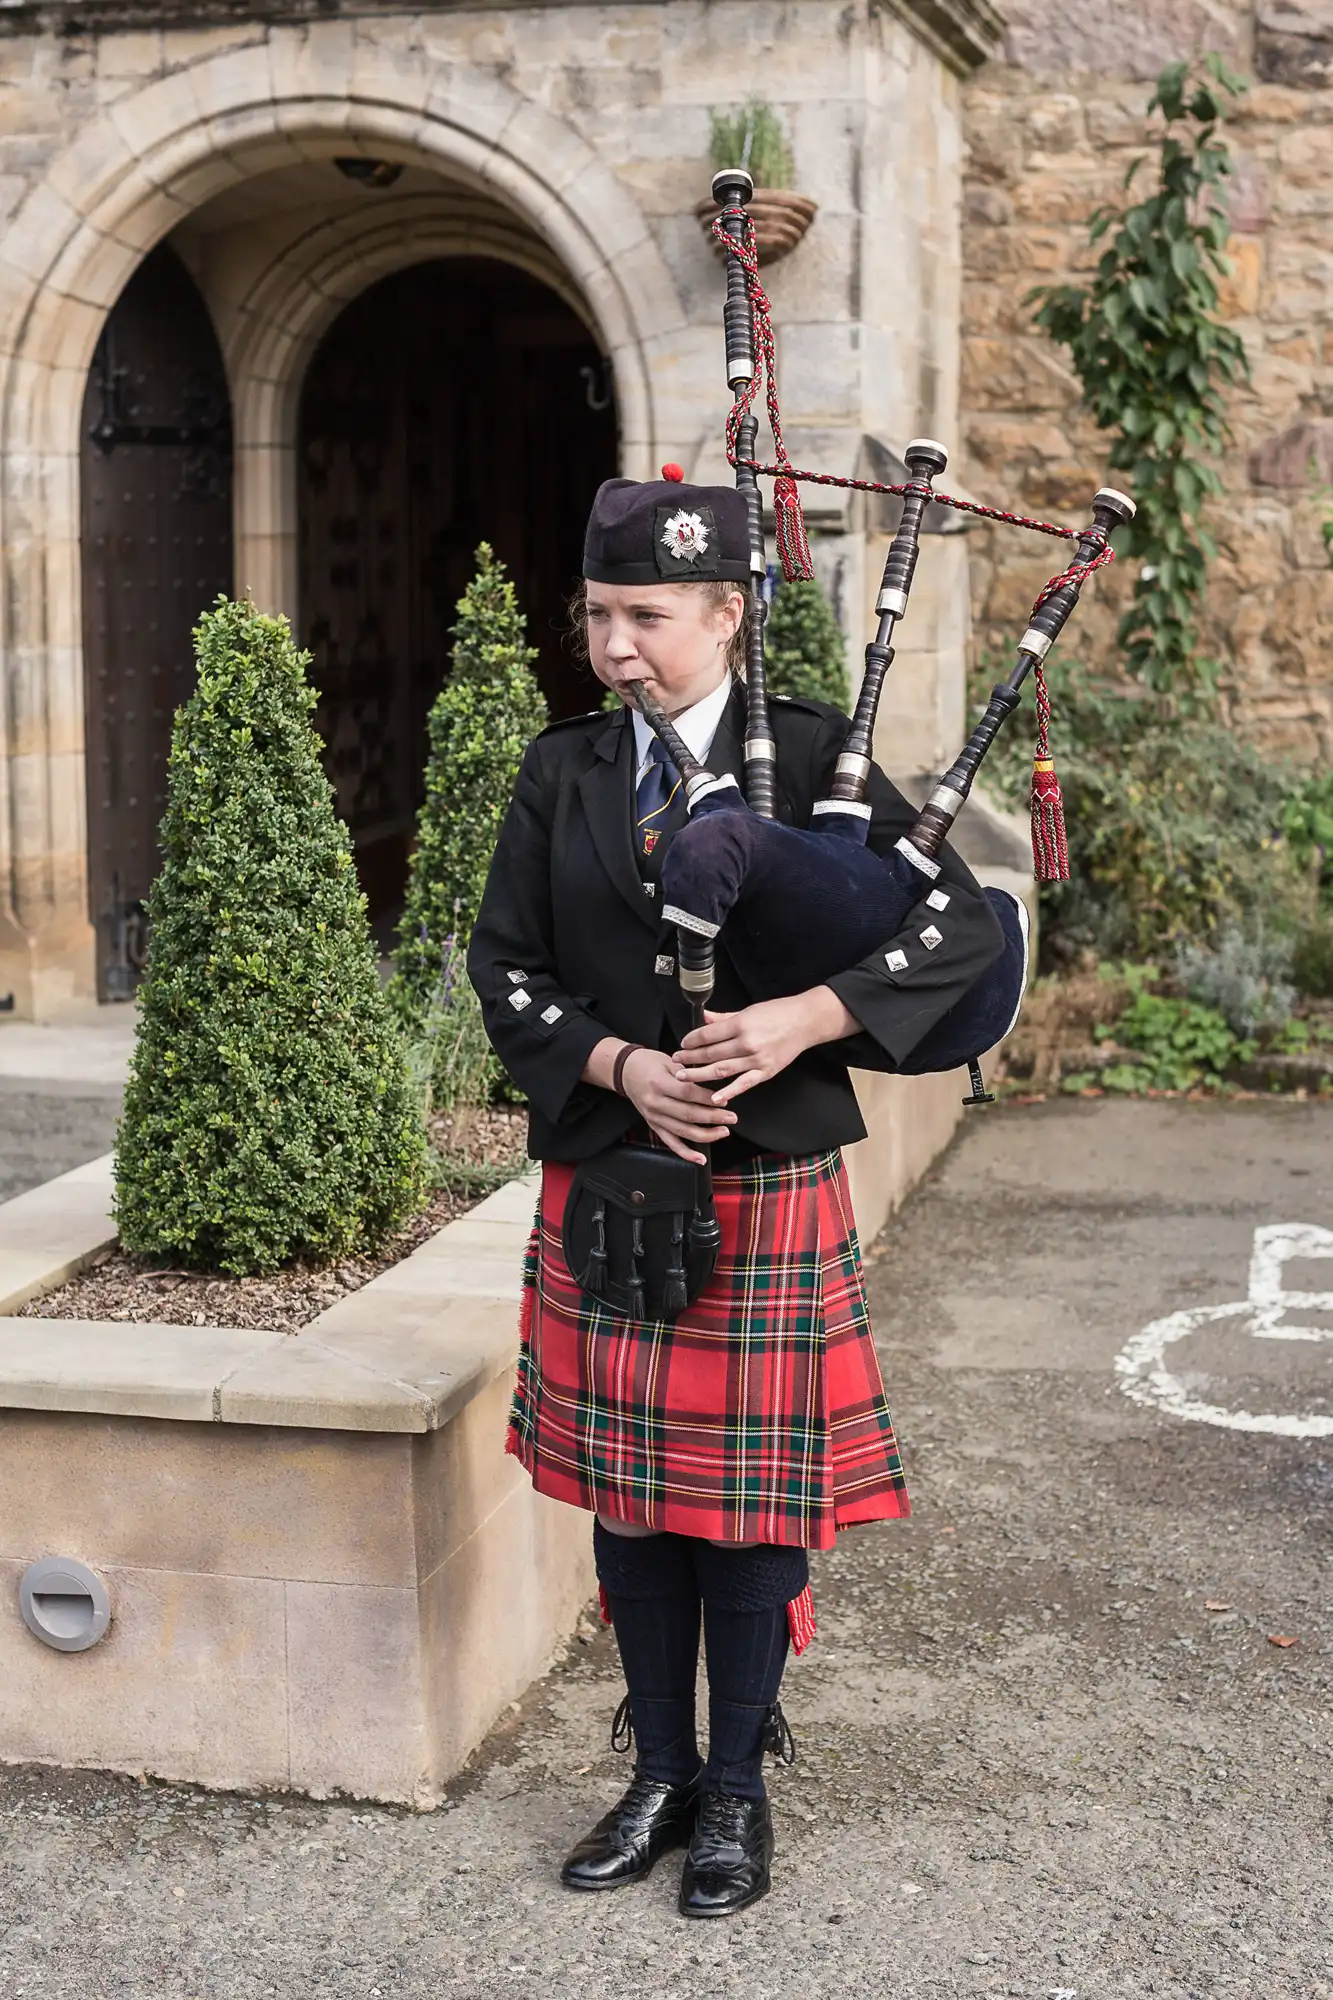 A woman in traditional scottish attire, including a tartan kilt, playing the bagpipes outside a stone church entrance.